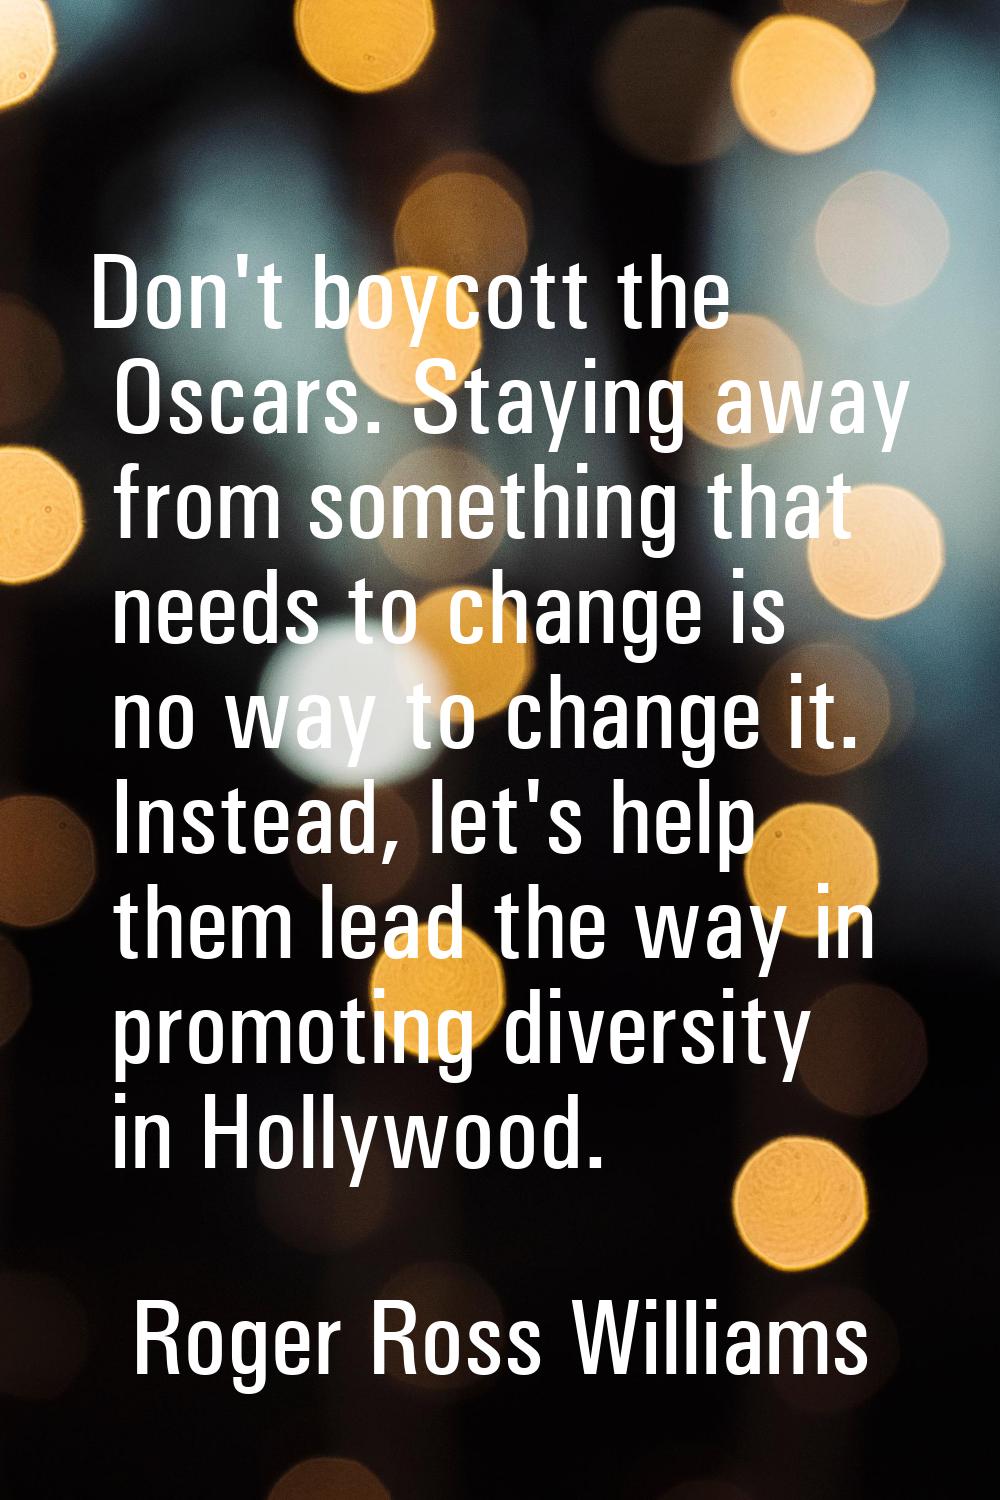 Don't boycott the Oscars. Staying away from something that needs to change is no way to change it. 